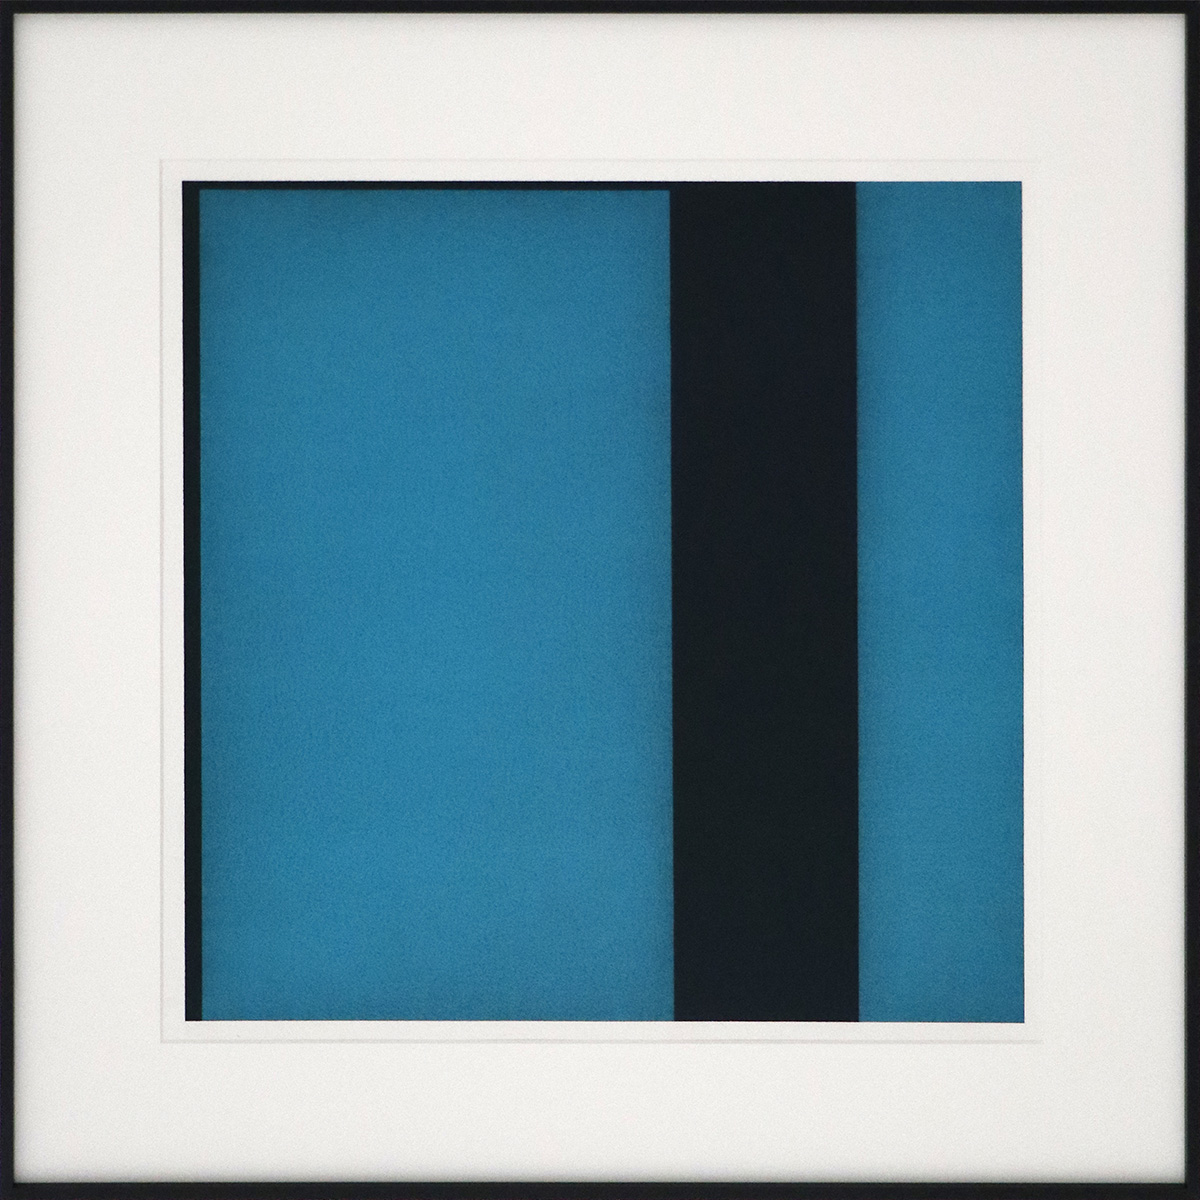 Unbound Turquois, 200150 x 50 cm in 70 x 70 cmAcrylic and charcoal on paper; framed, museum glass